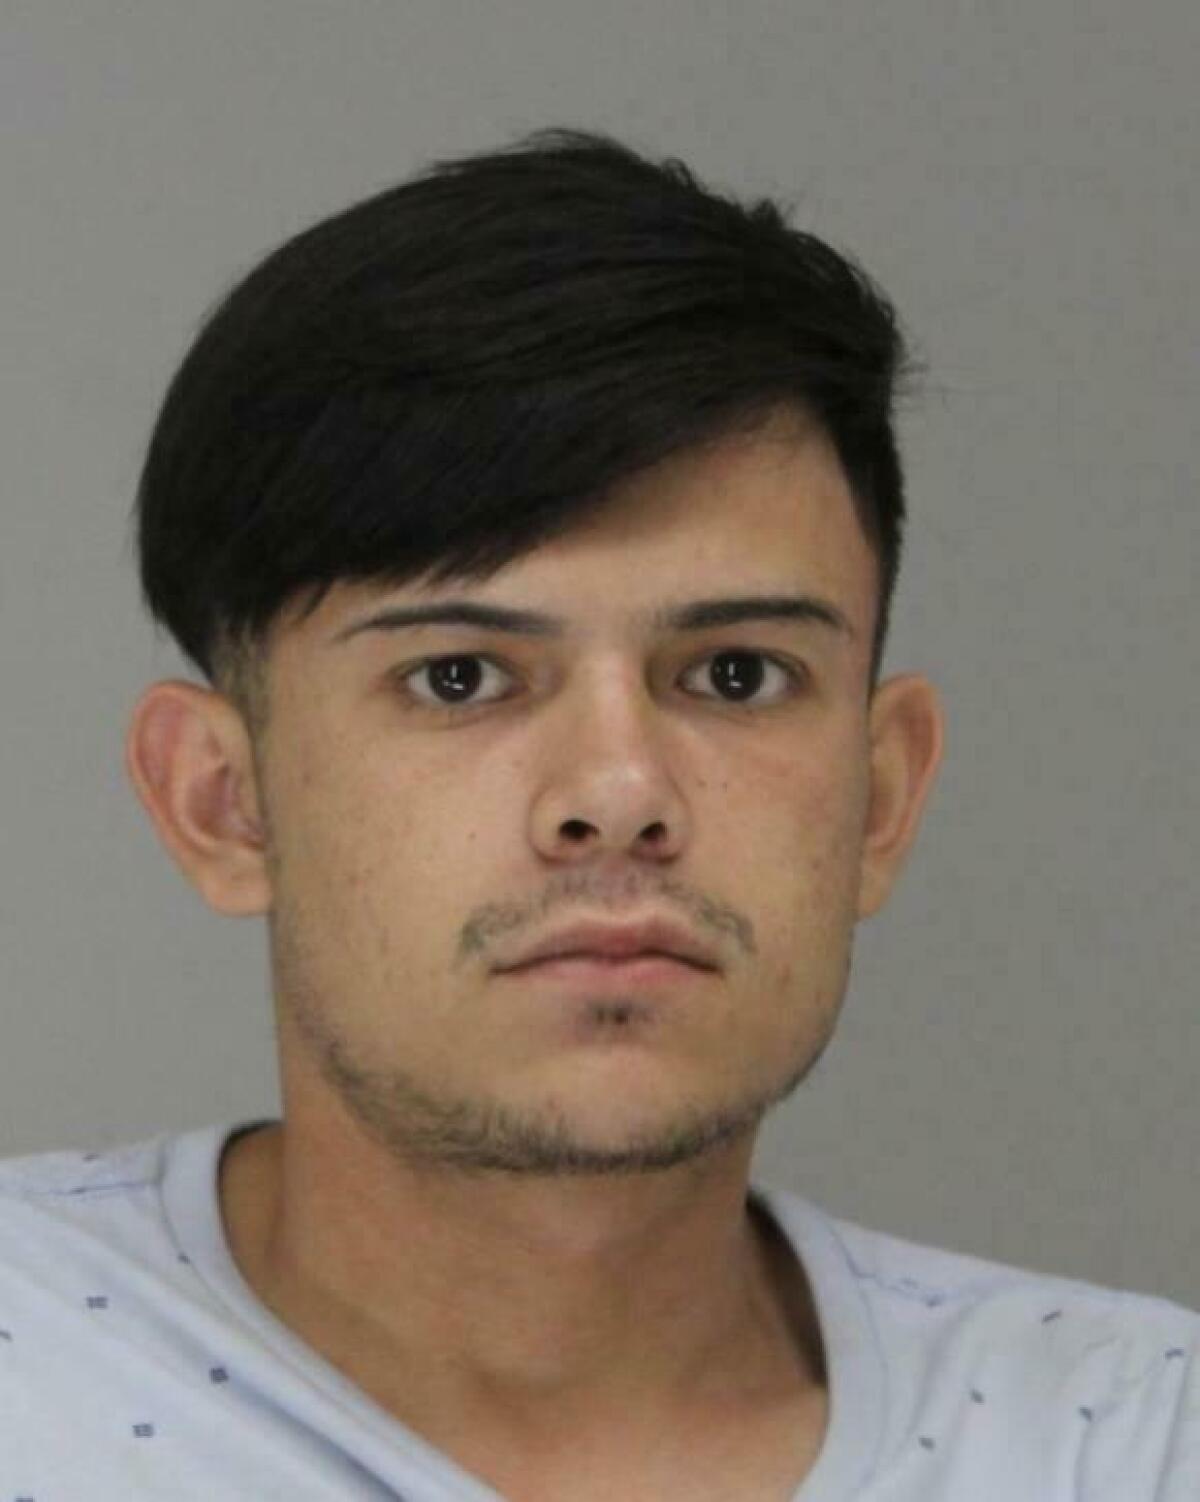 FILE -This undated photo provided by the Dallas County Sheriff's Department in Dallas, Texas shows Ruben Alvarado. Alvarado, who strangled a transgender woman to death and dumped her body in a lake in 2019 was sentenced Thursday, Nov. 11, 2021 to 37 years in prison. (Dallas County Sheriff's Department via AP, File)